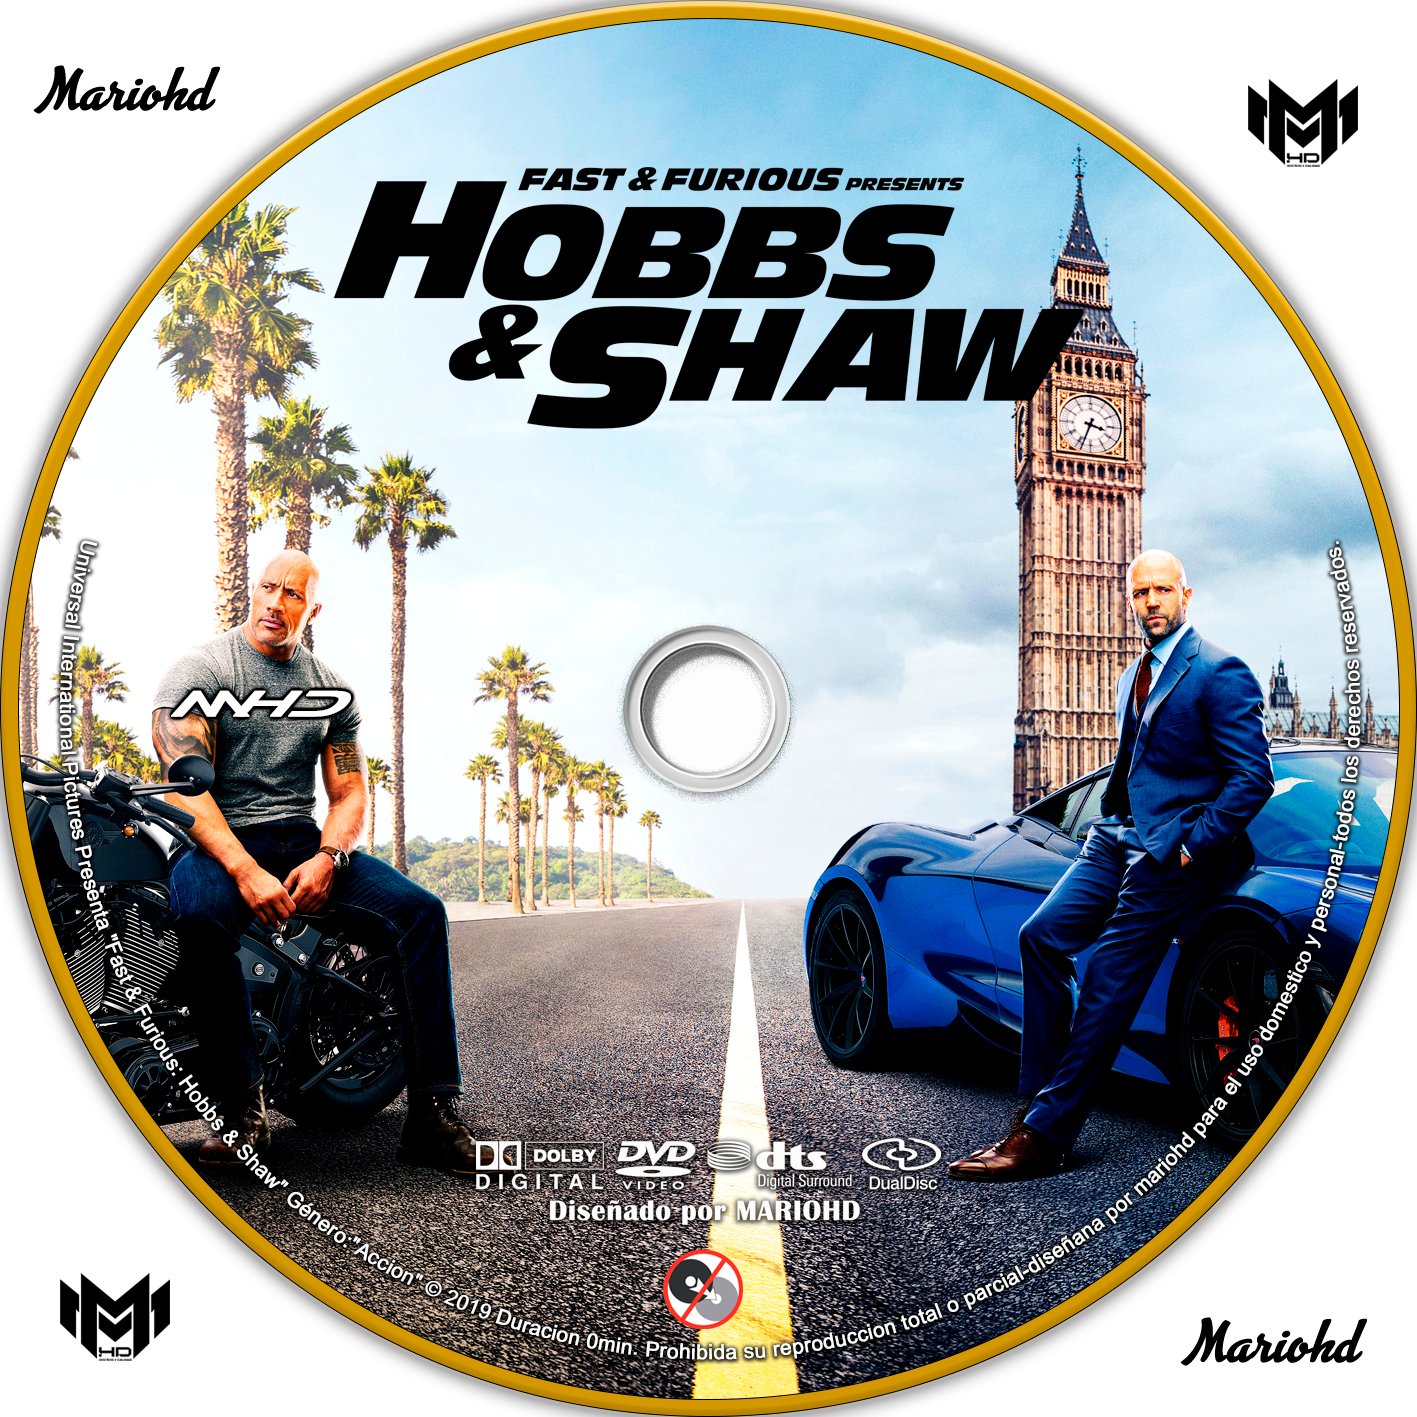 Hobbsand Shaw Fast Furious Spinoff D V D Cover